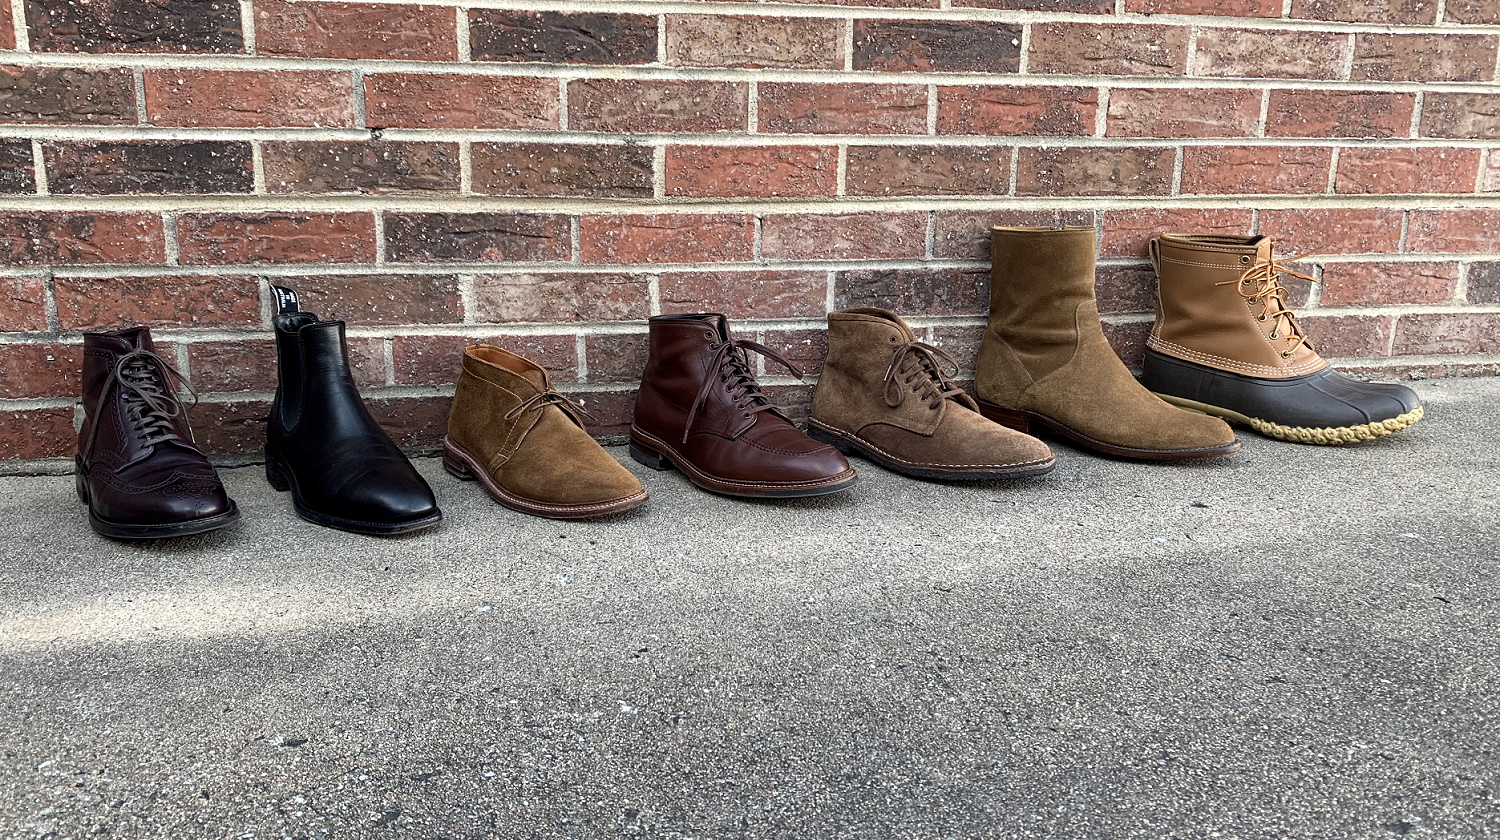 Best Chelsea boots for men 2022 to suit your style and budget